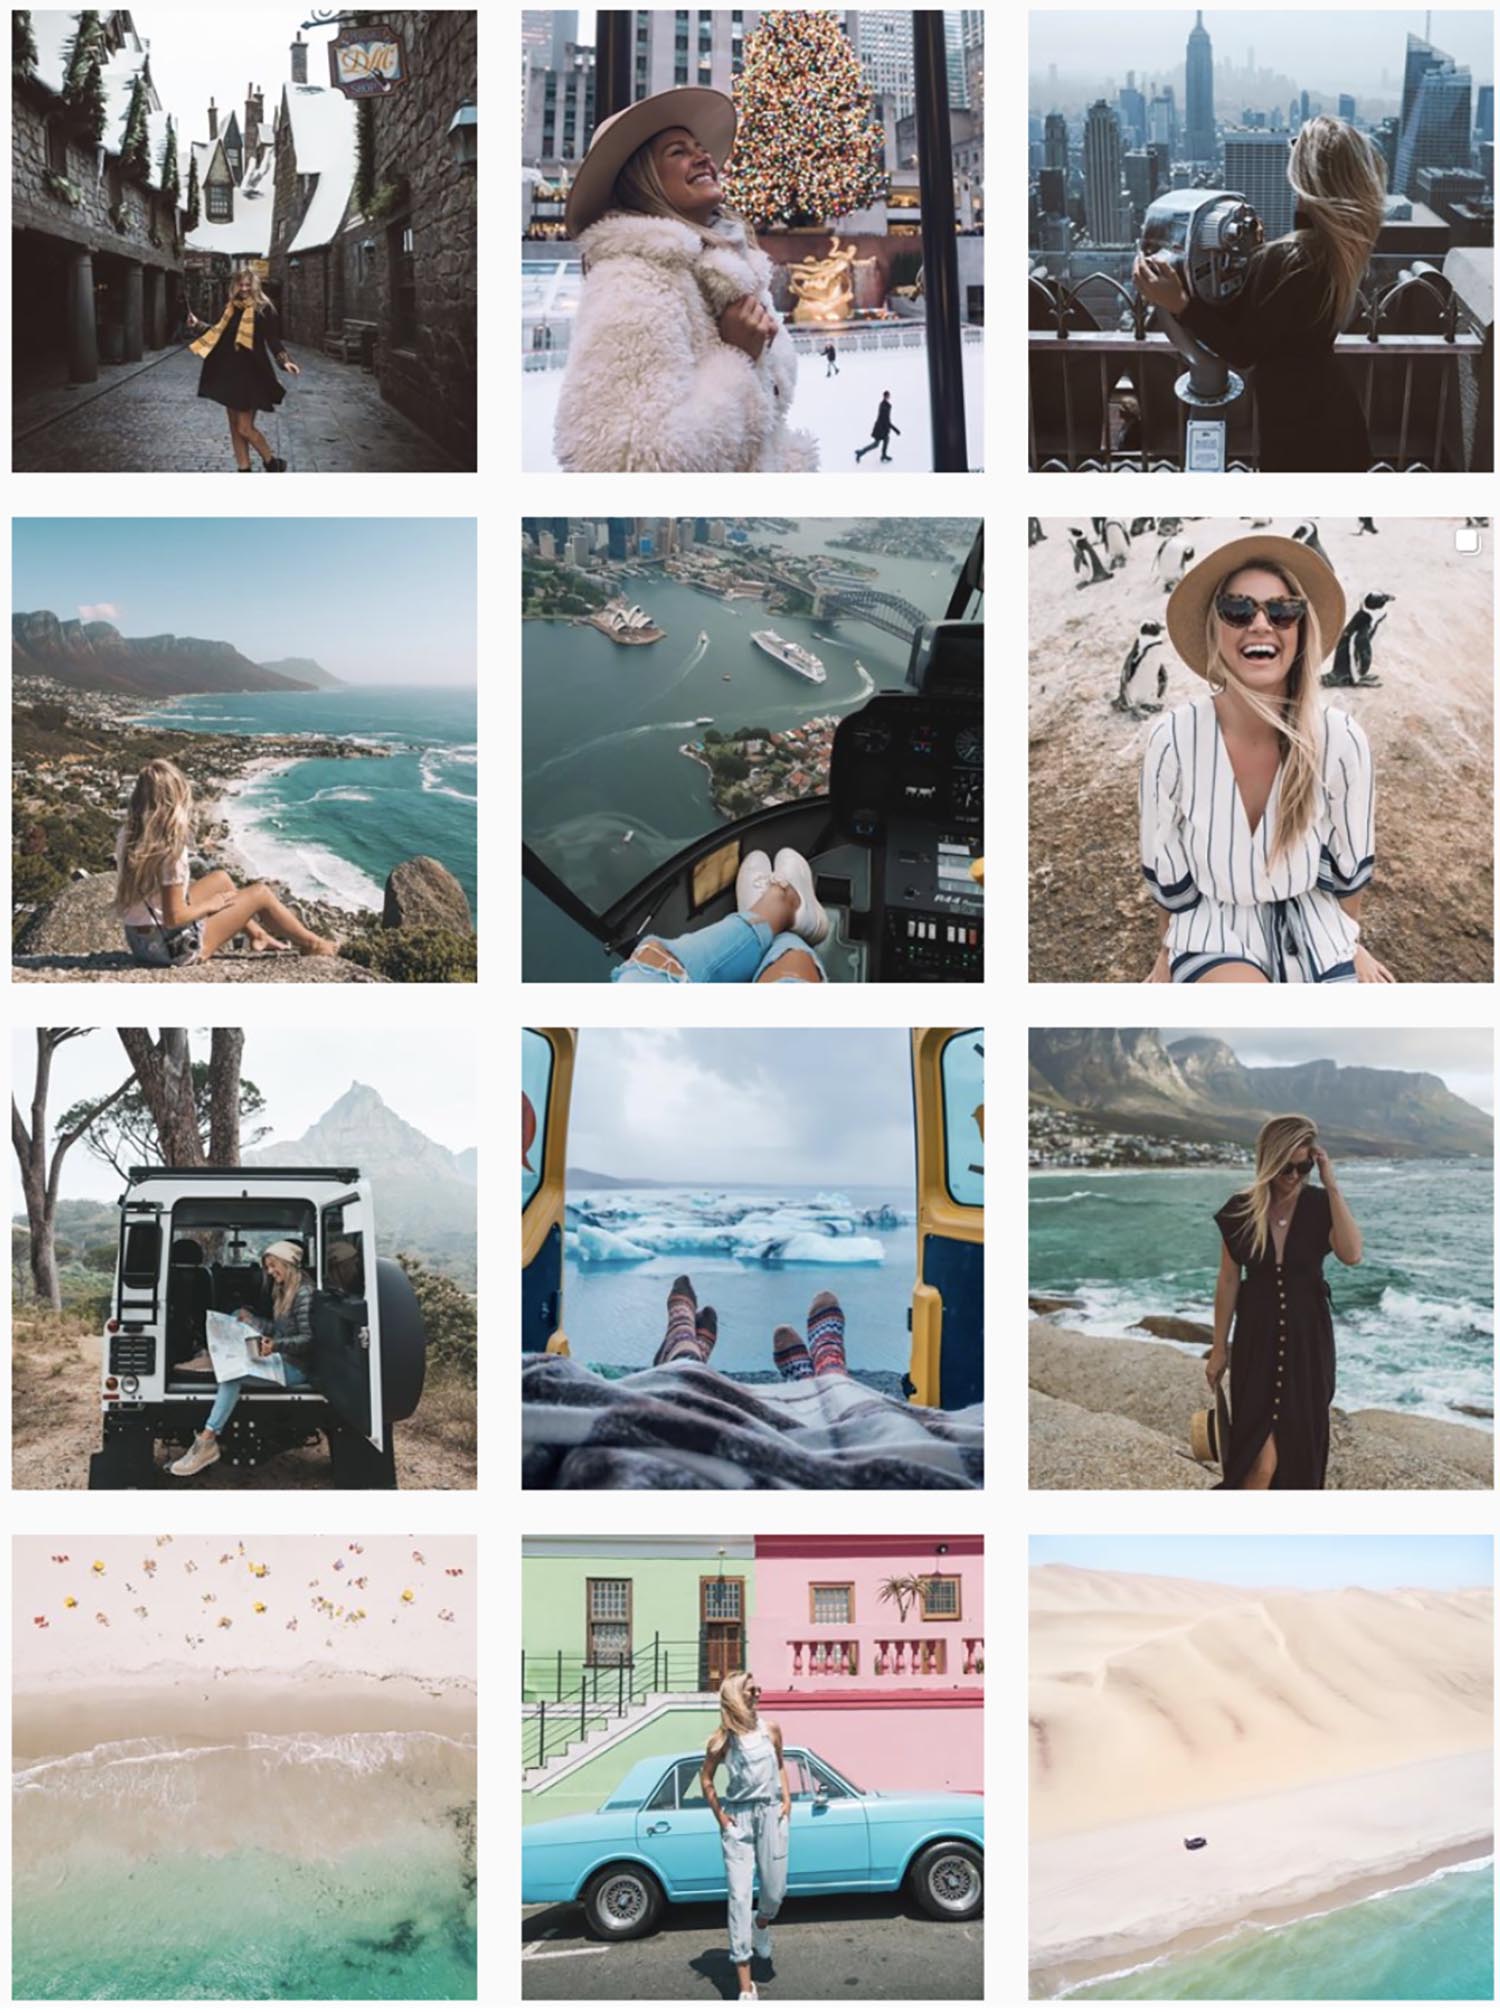 The Blonde Abroad Instagram Feed